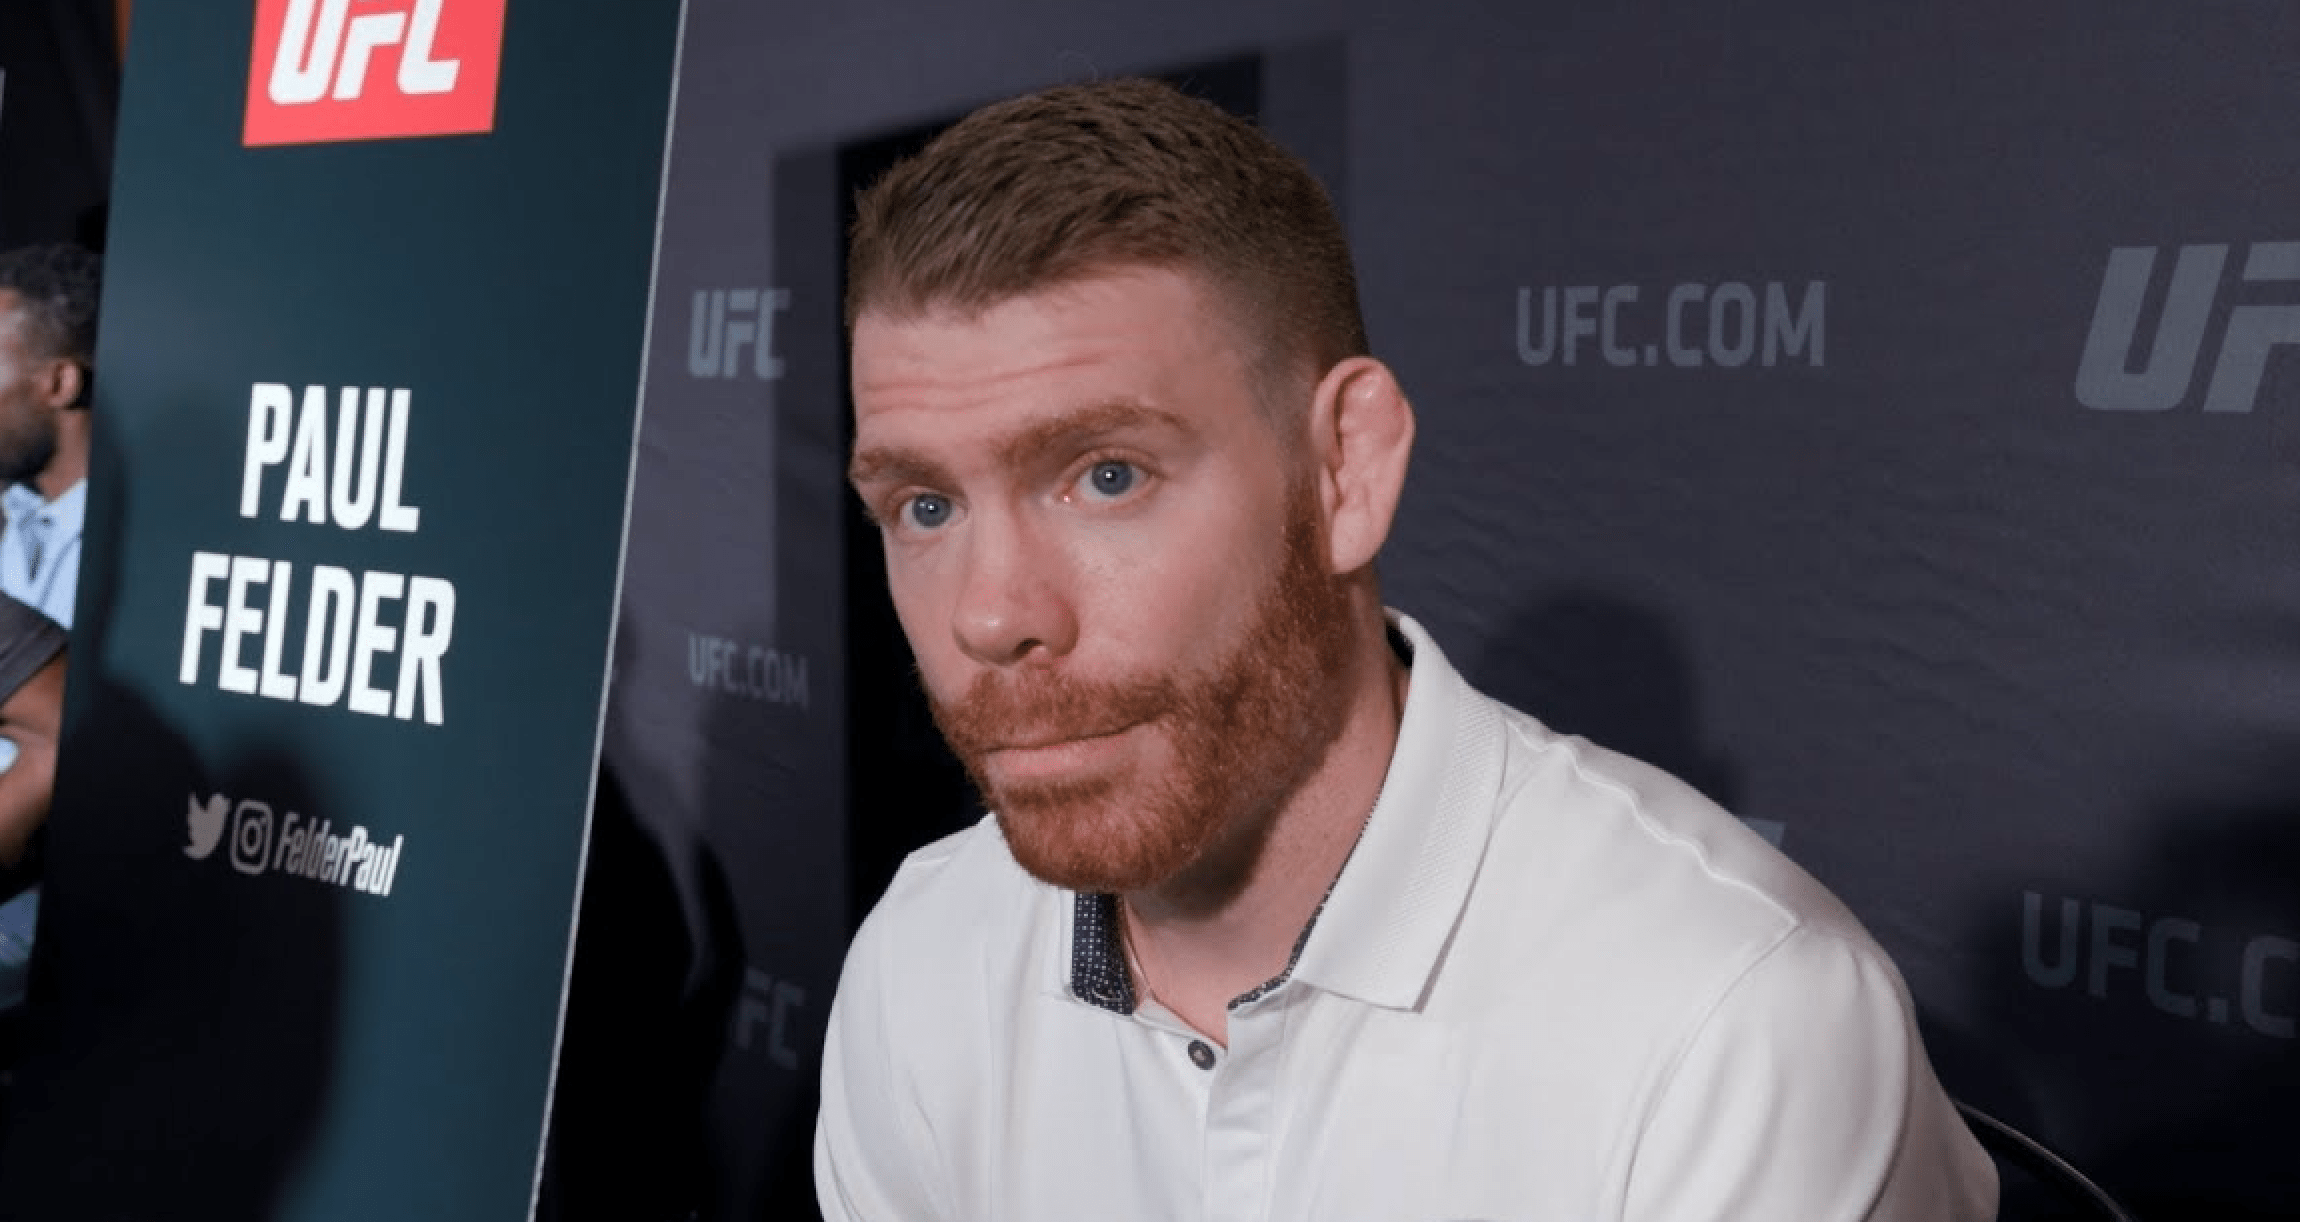 UFC – Paul Felder On Conor McGregor: Get Him Out Of Our Way